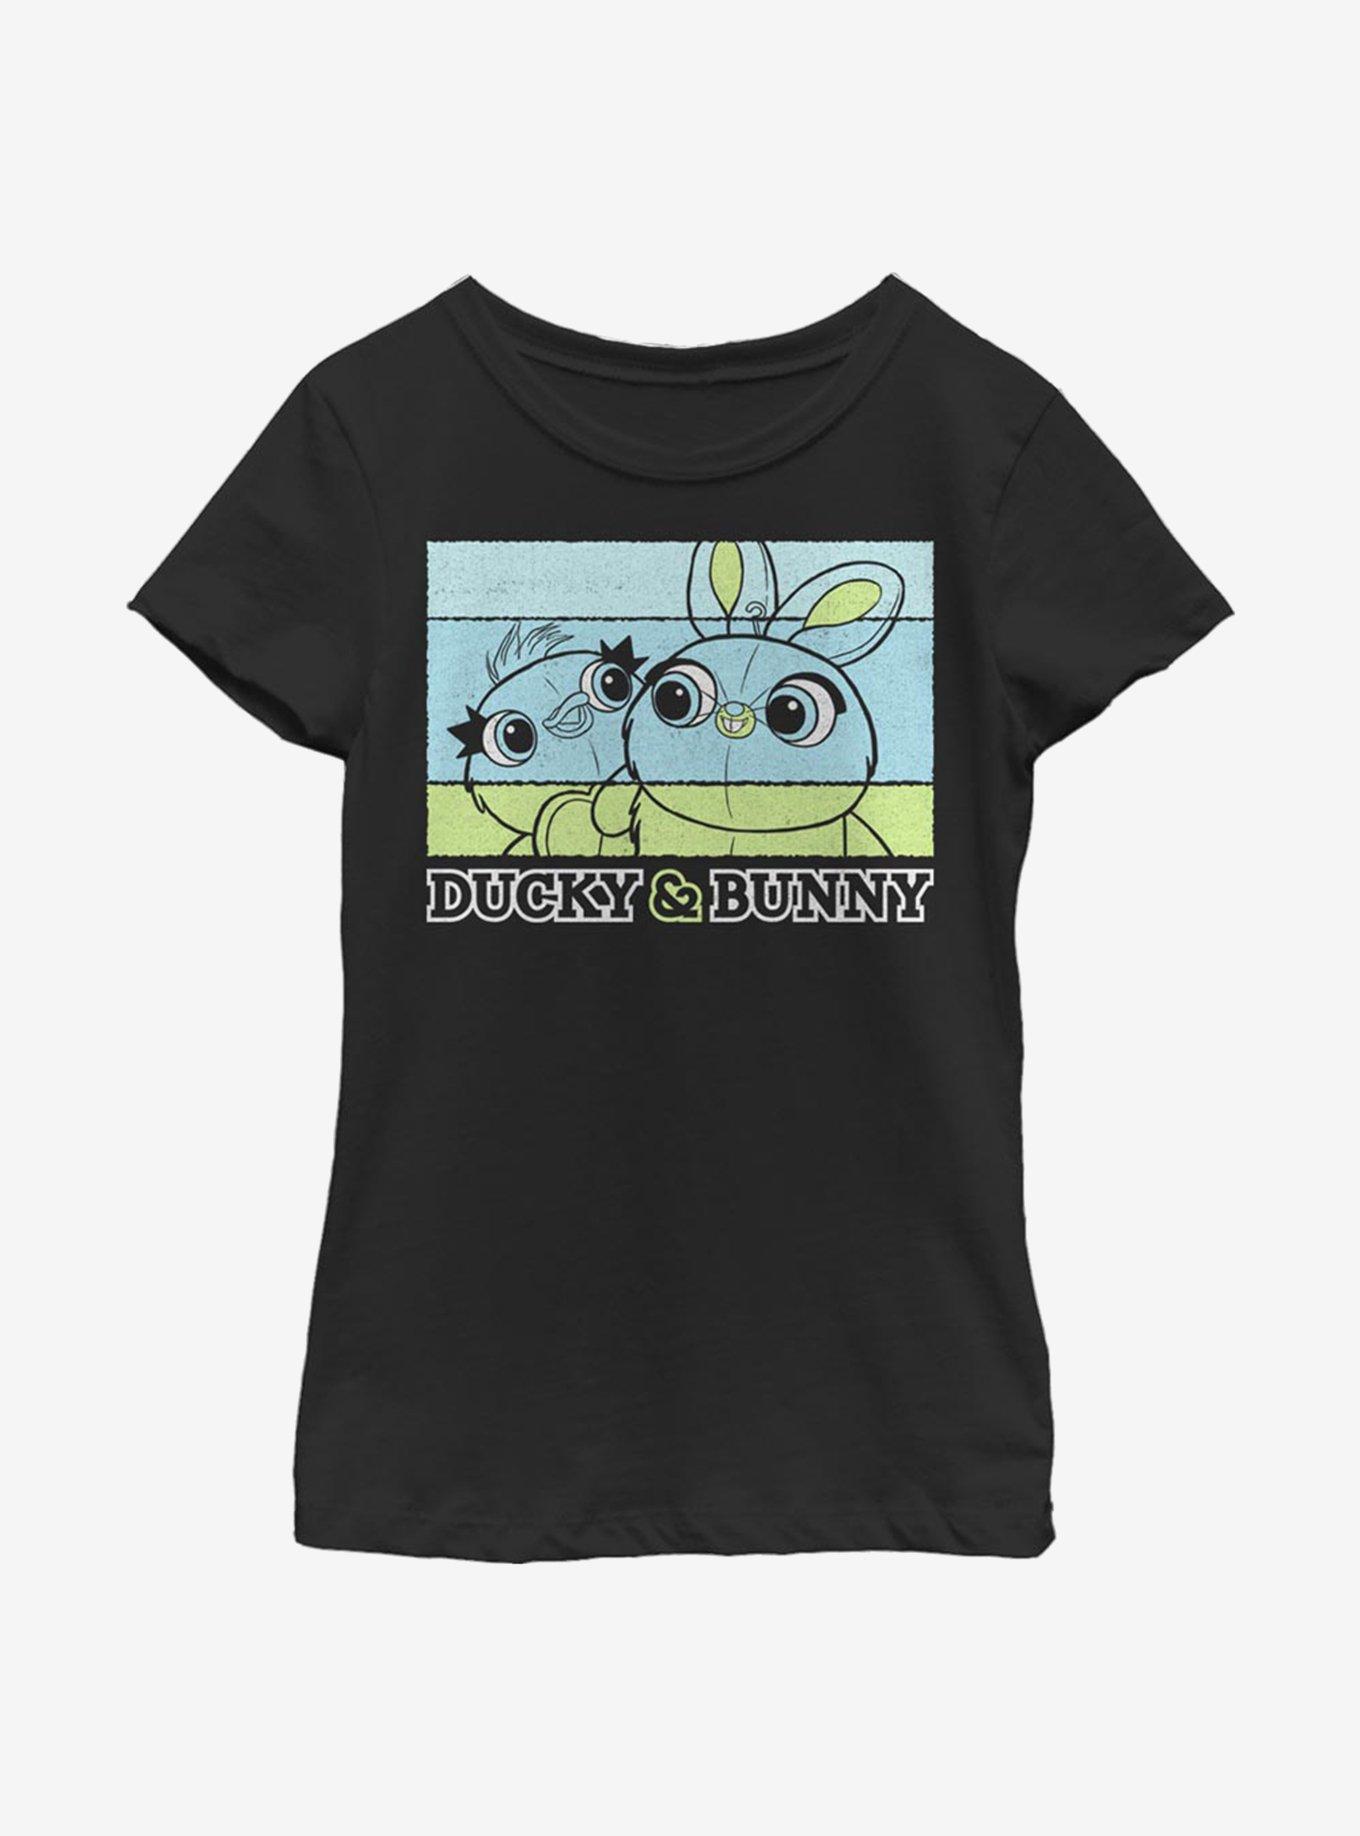 Disney Pixar Toy Story 4 Duckie And Bunny Youth Girls T-Shirt, BLACK, hi-res